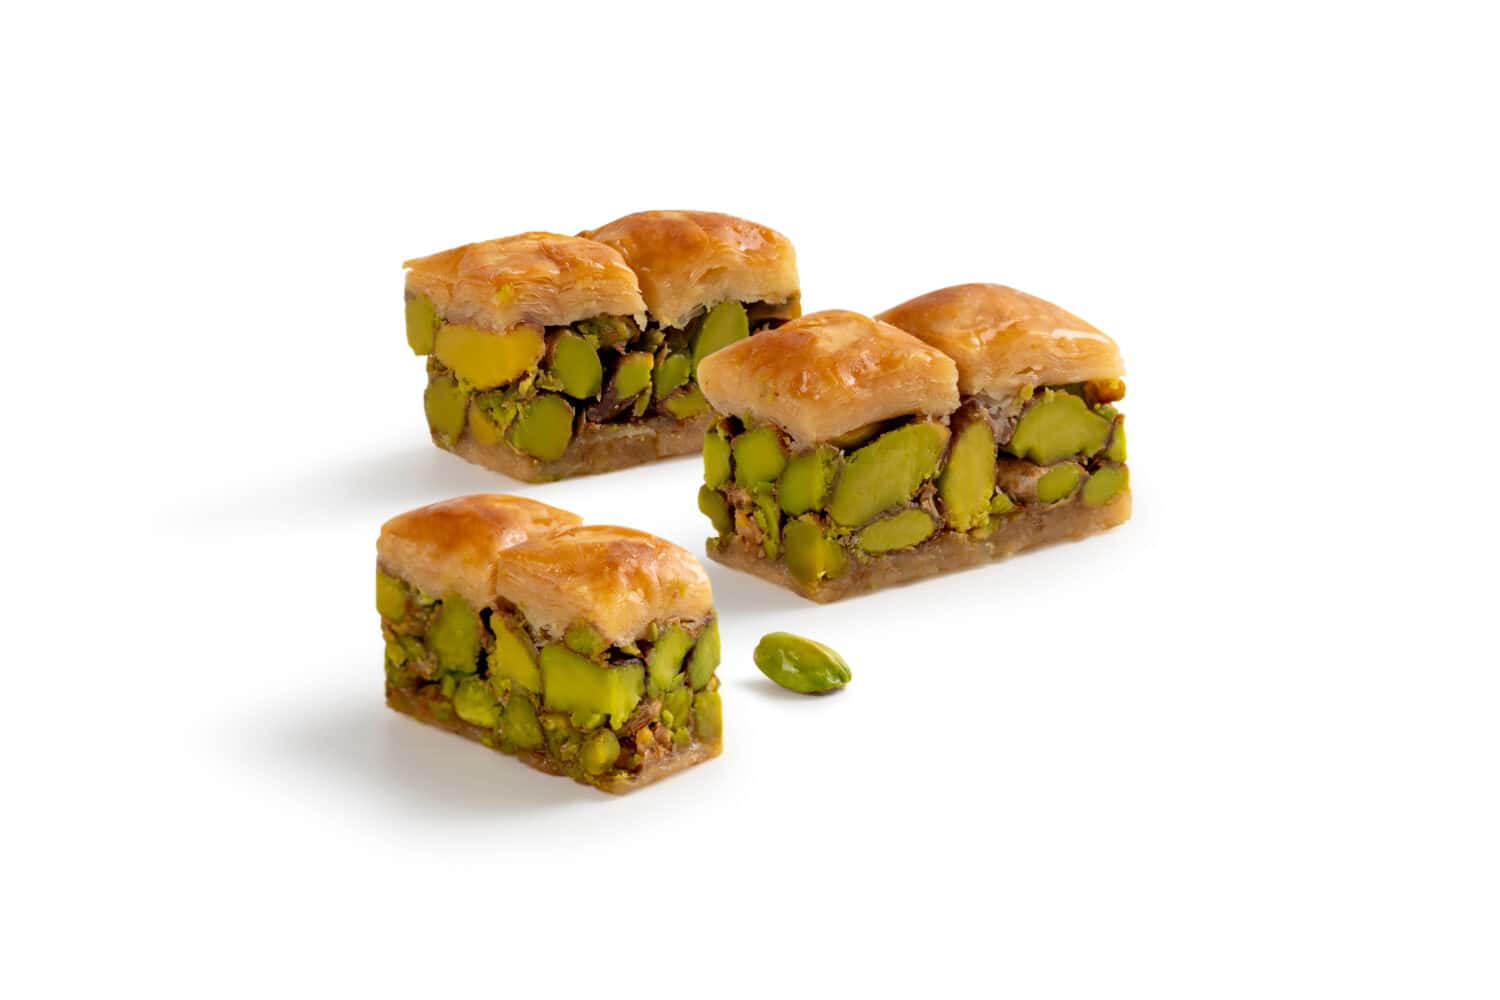 Delicious Baklava with PistachioTraditional Turkish and Syrian Sweets